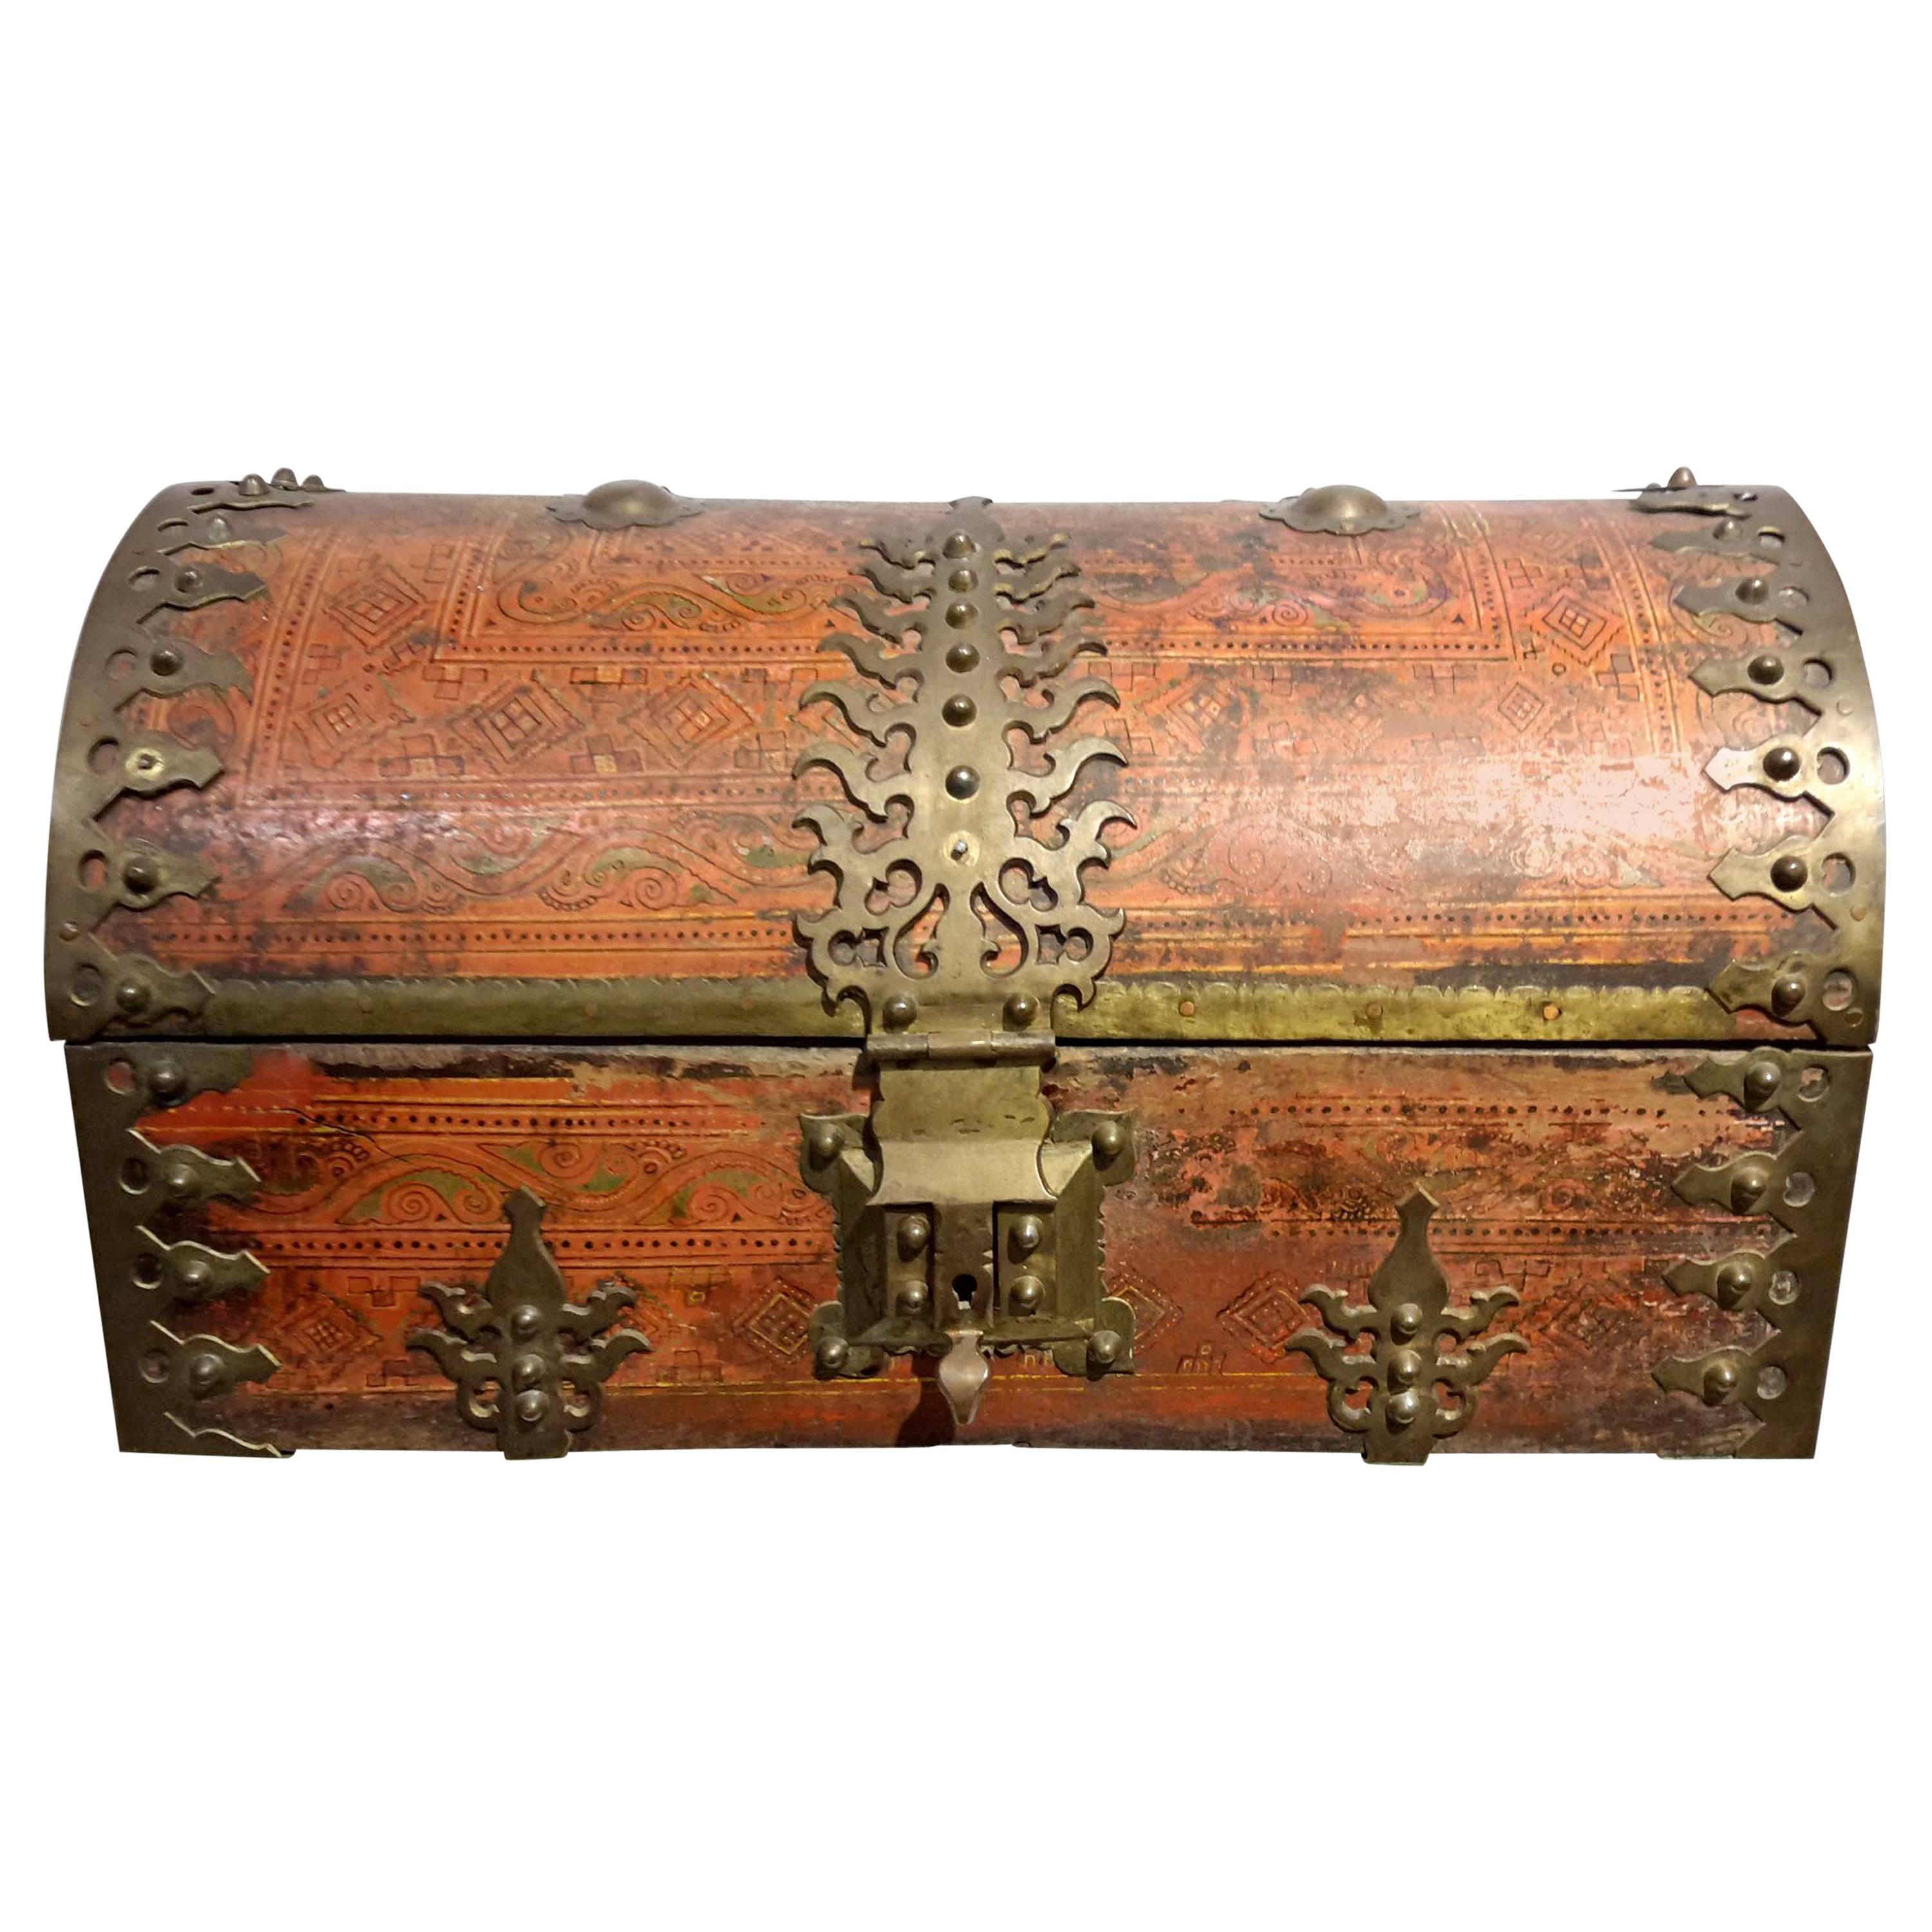 Large Anglo Indian Malabar Treasure Chest, Brass Fittings circa 19th Century